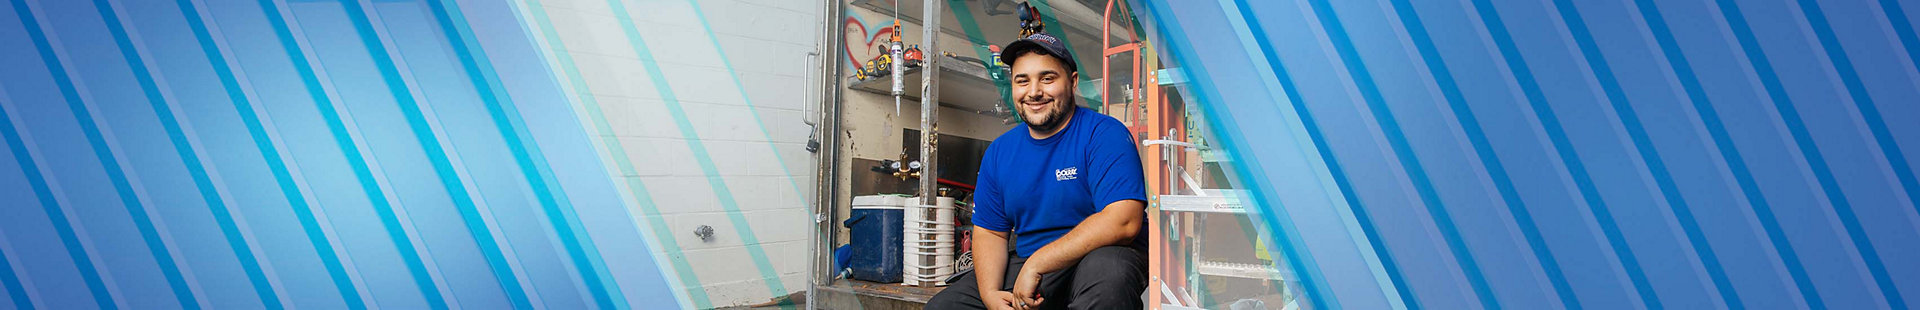 Smiling Coolray HVAC technician